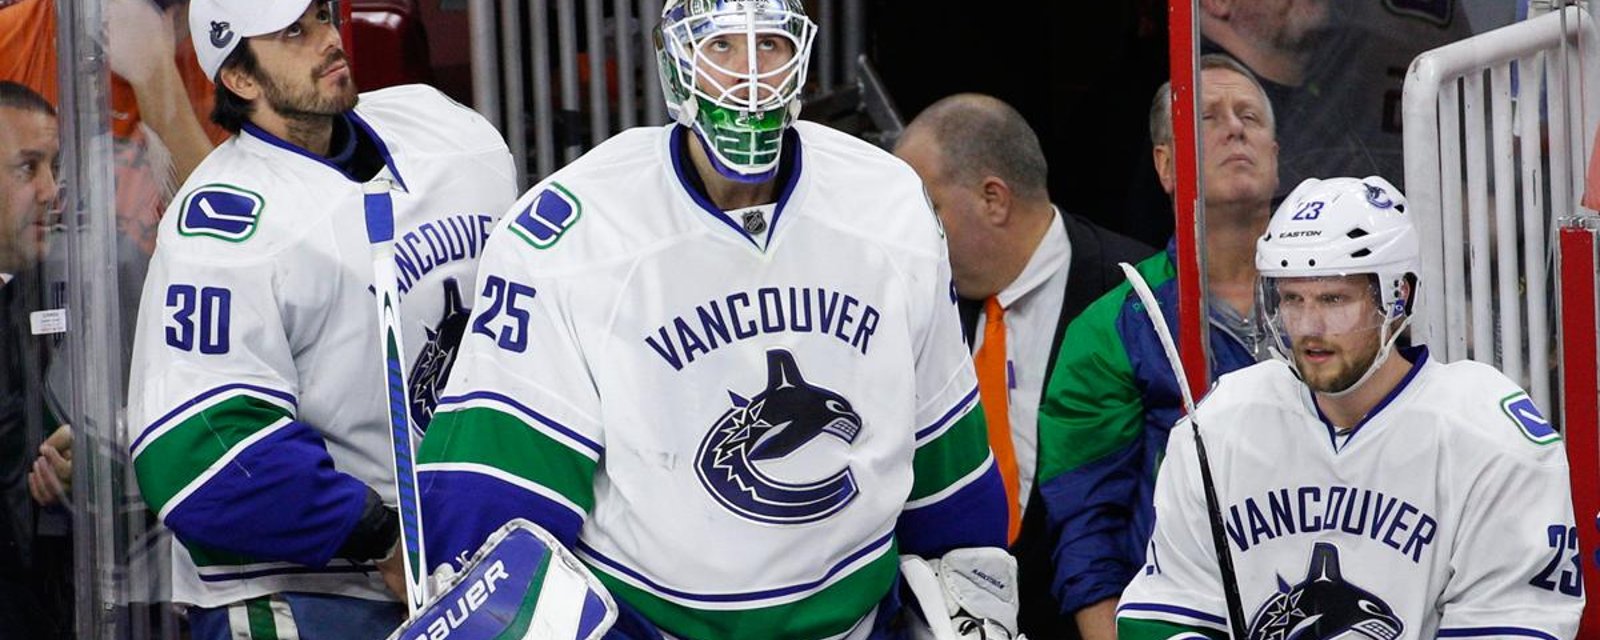 Goalies future clarified in Vancouver. 